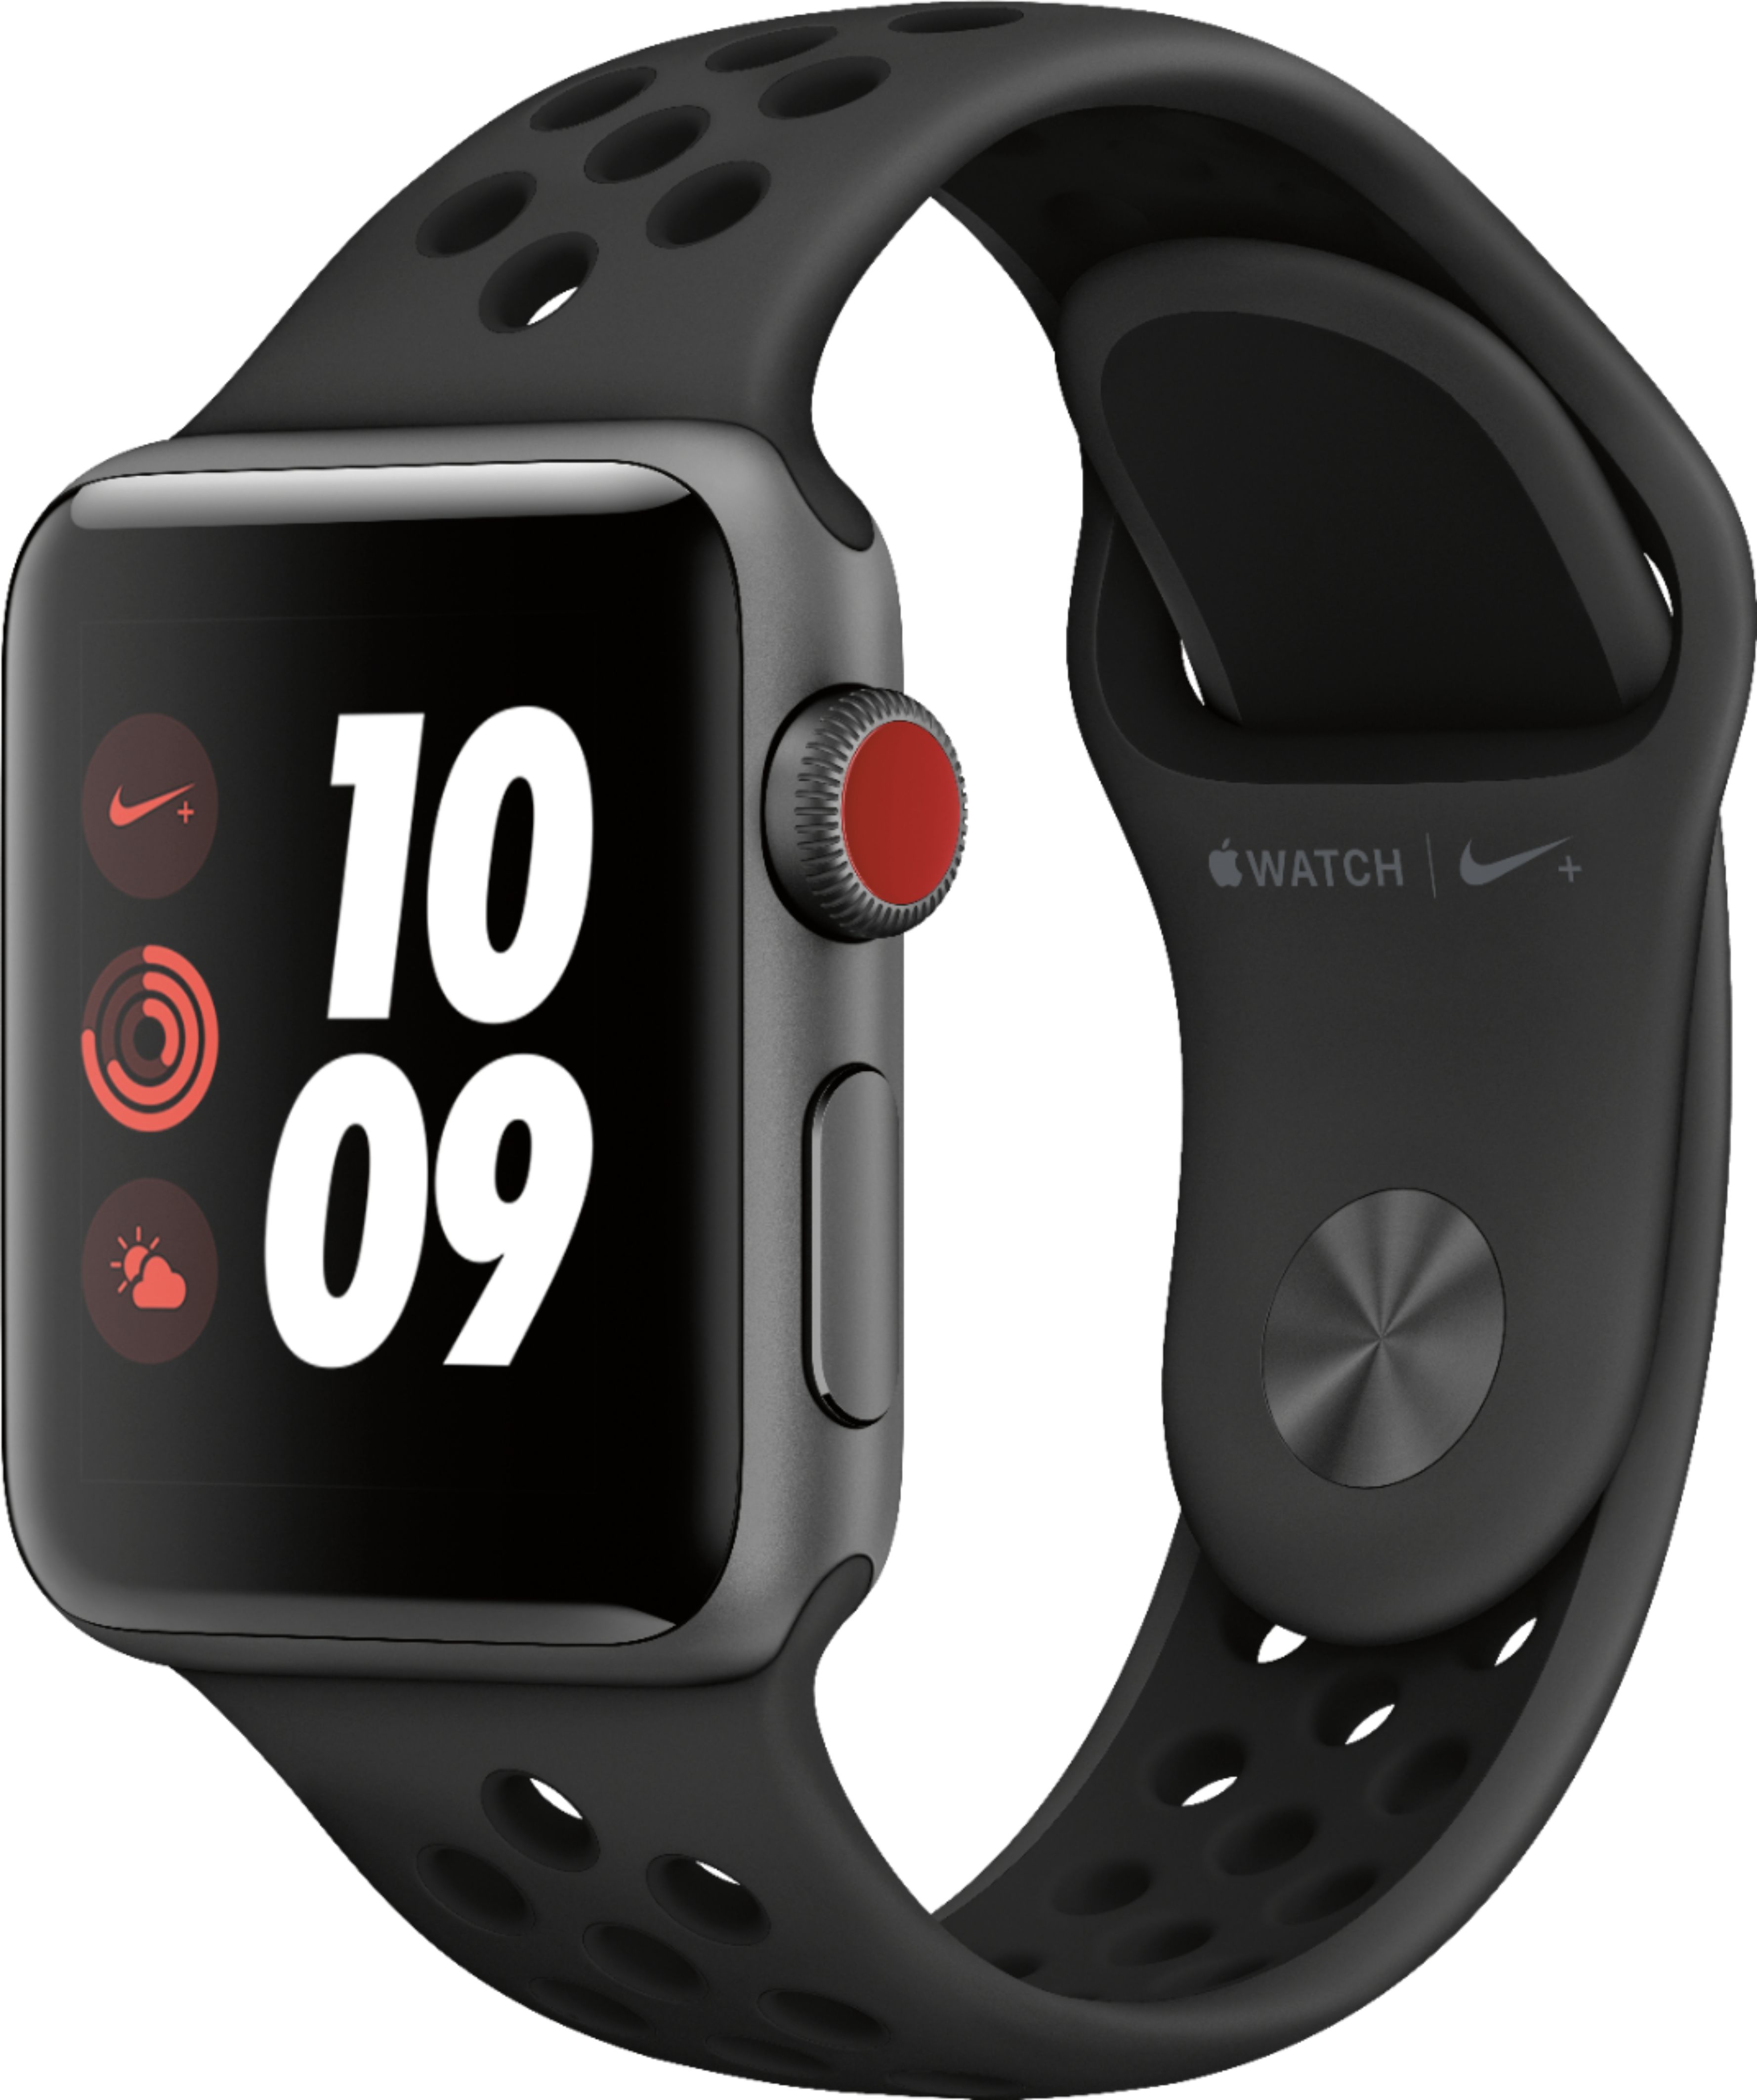 0190198803955 - APPLE WATCH NIKE+ SERIES 3 (GPS + CELLULAR) 38MM SPACE GRAY ALUMINUM CASE WITH ANTHRACITE/BLACK NIKE SPORT BAND - SPACE GRAY ALUMINUM